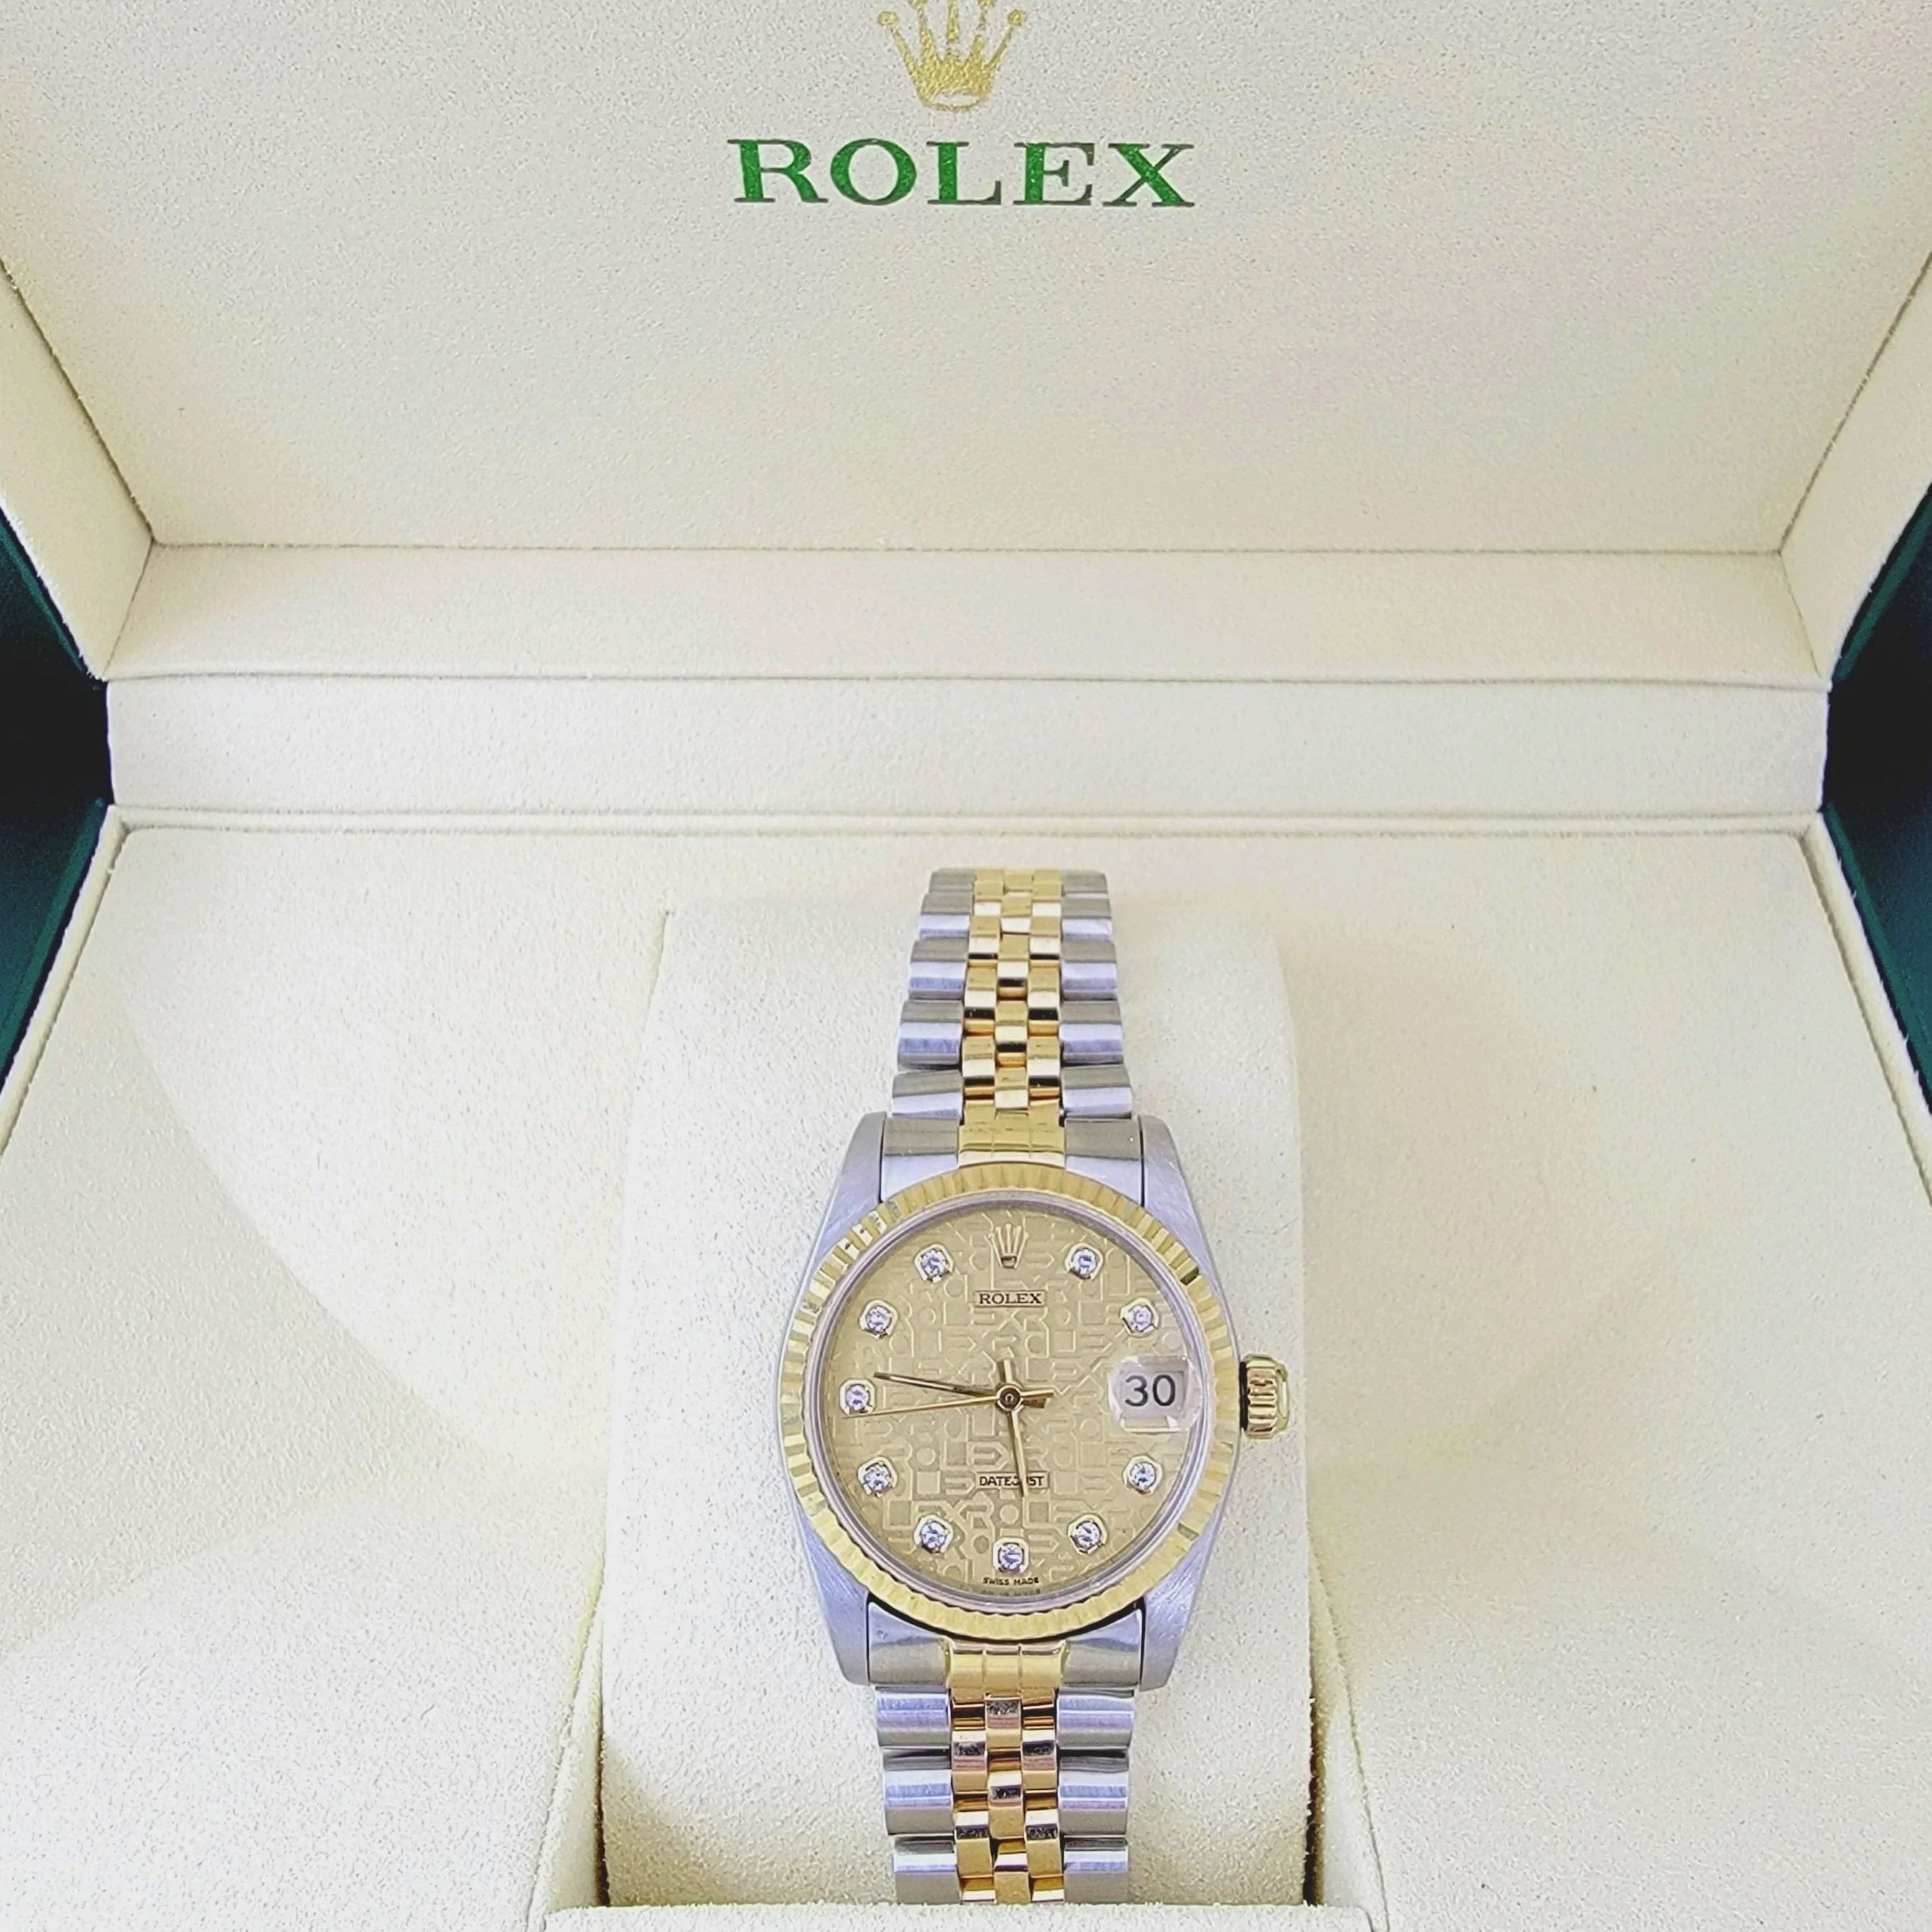 Ladies Rolex Midsize 31mm DateJust Two Tone 18K Yellow Gold / Stainless Steel Wristwatch w/ Hologram Diamond Dial & Fluted Bezel. (Pre-Owned 68273)